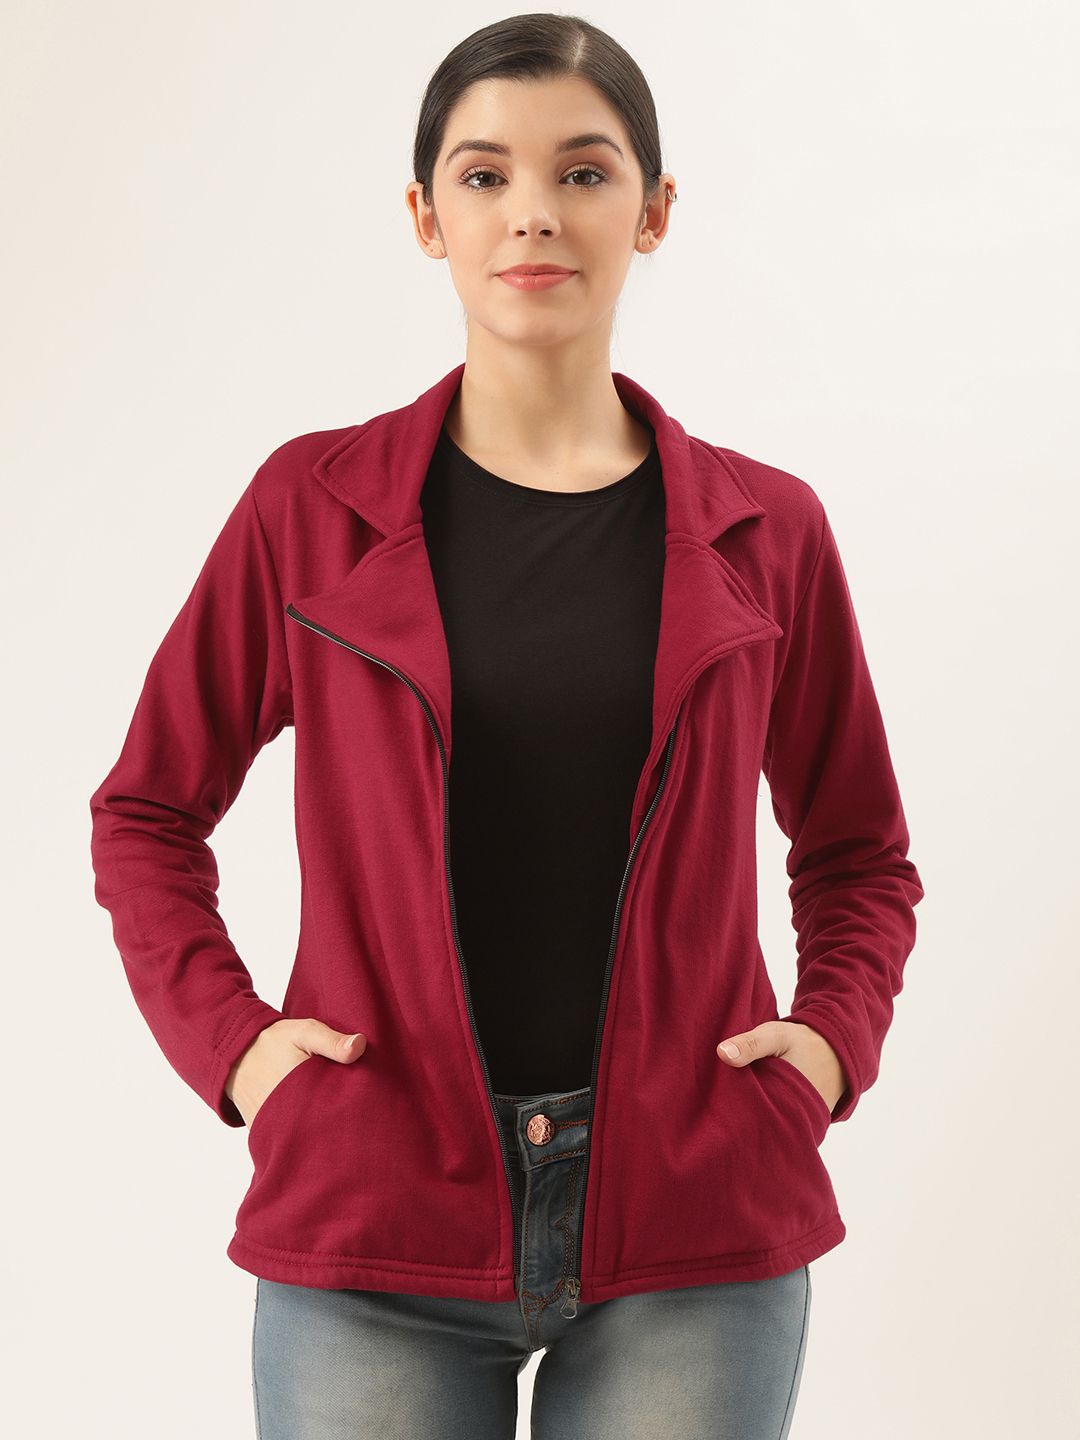 Belle Fille Women Burgundy Solid Asymmetric Closure Tailored Jacket Price in India